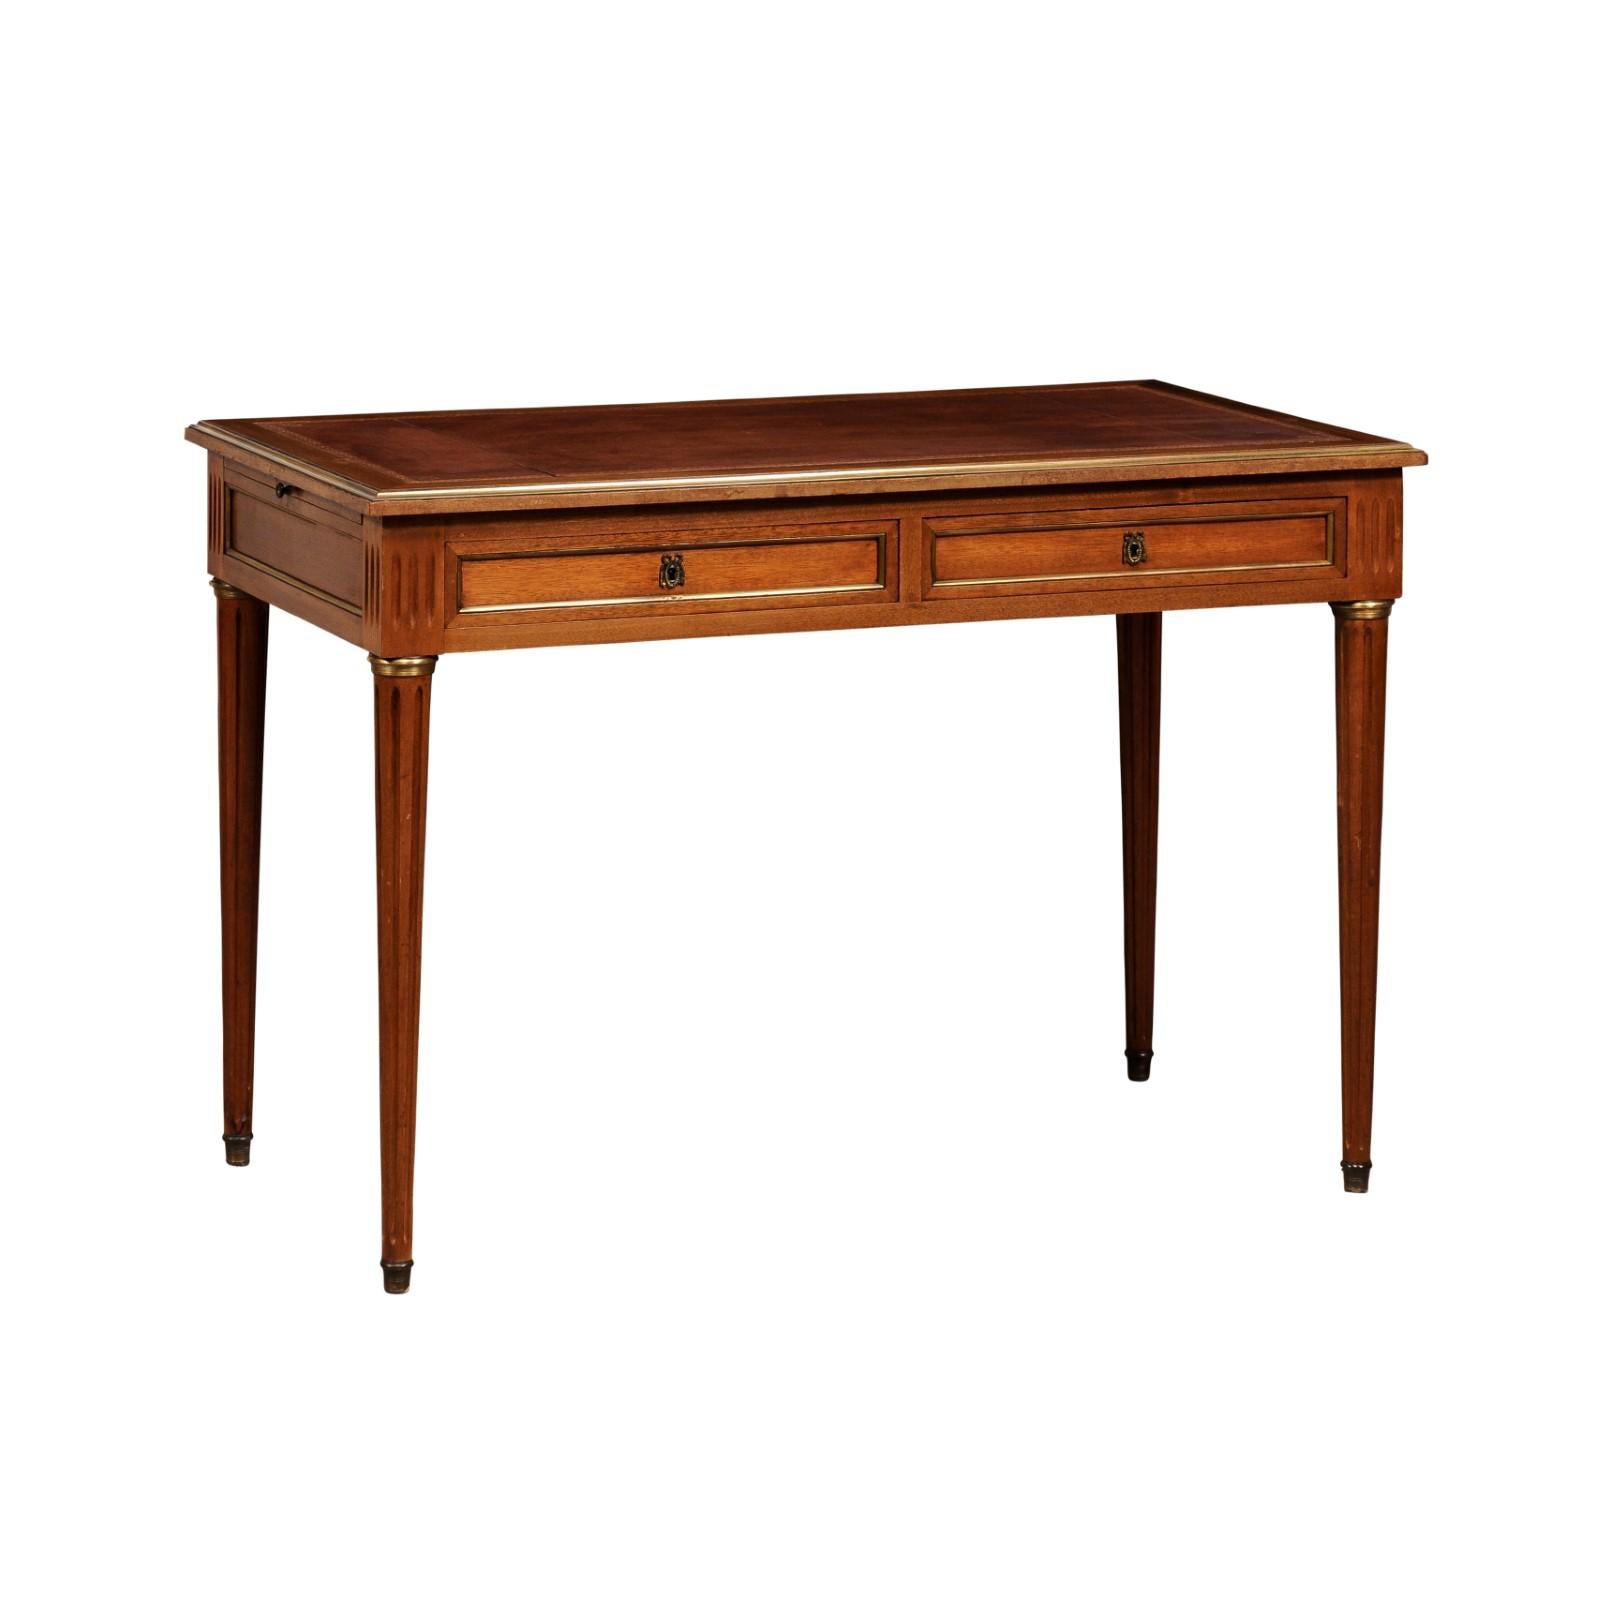 A French Louis XVI style walnut desk with leather top, pull-outs on the sides, two drawers, carved fluted legs and brass trim. Steeped in timeless French elegance, this Louis XVI style walnut desk, hailing from the 20th century, is a testament to